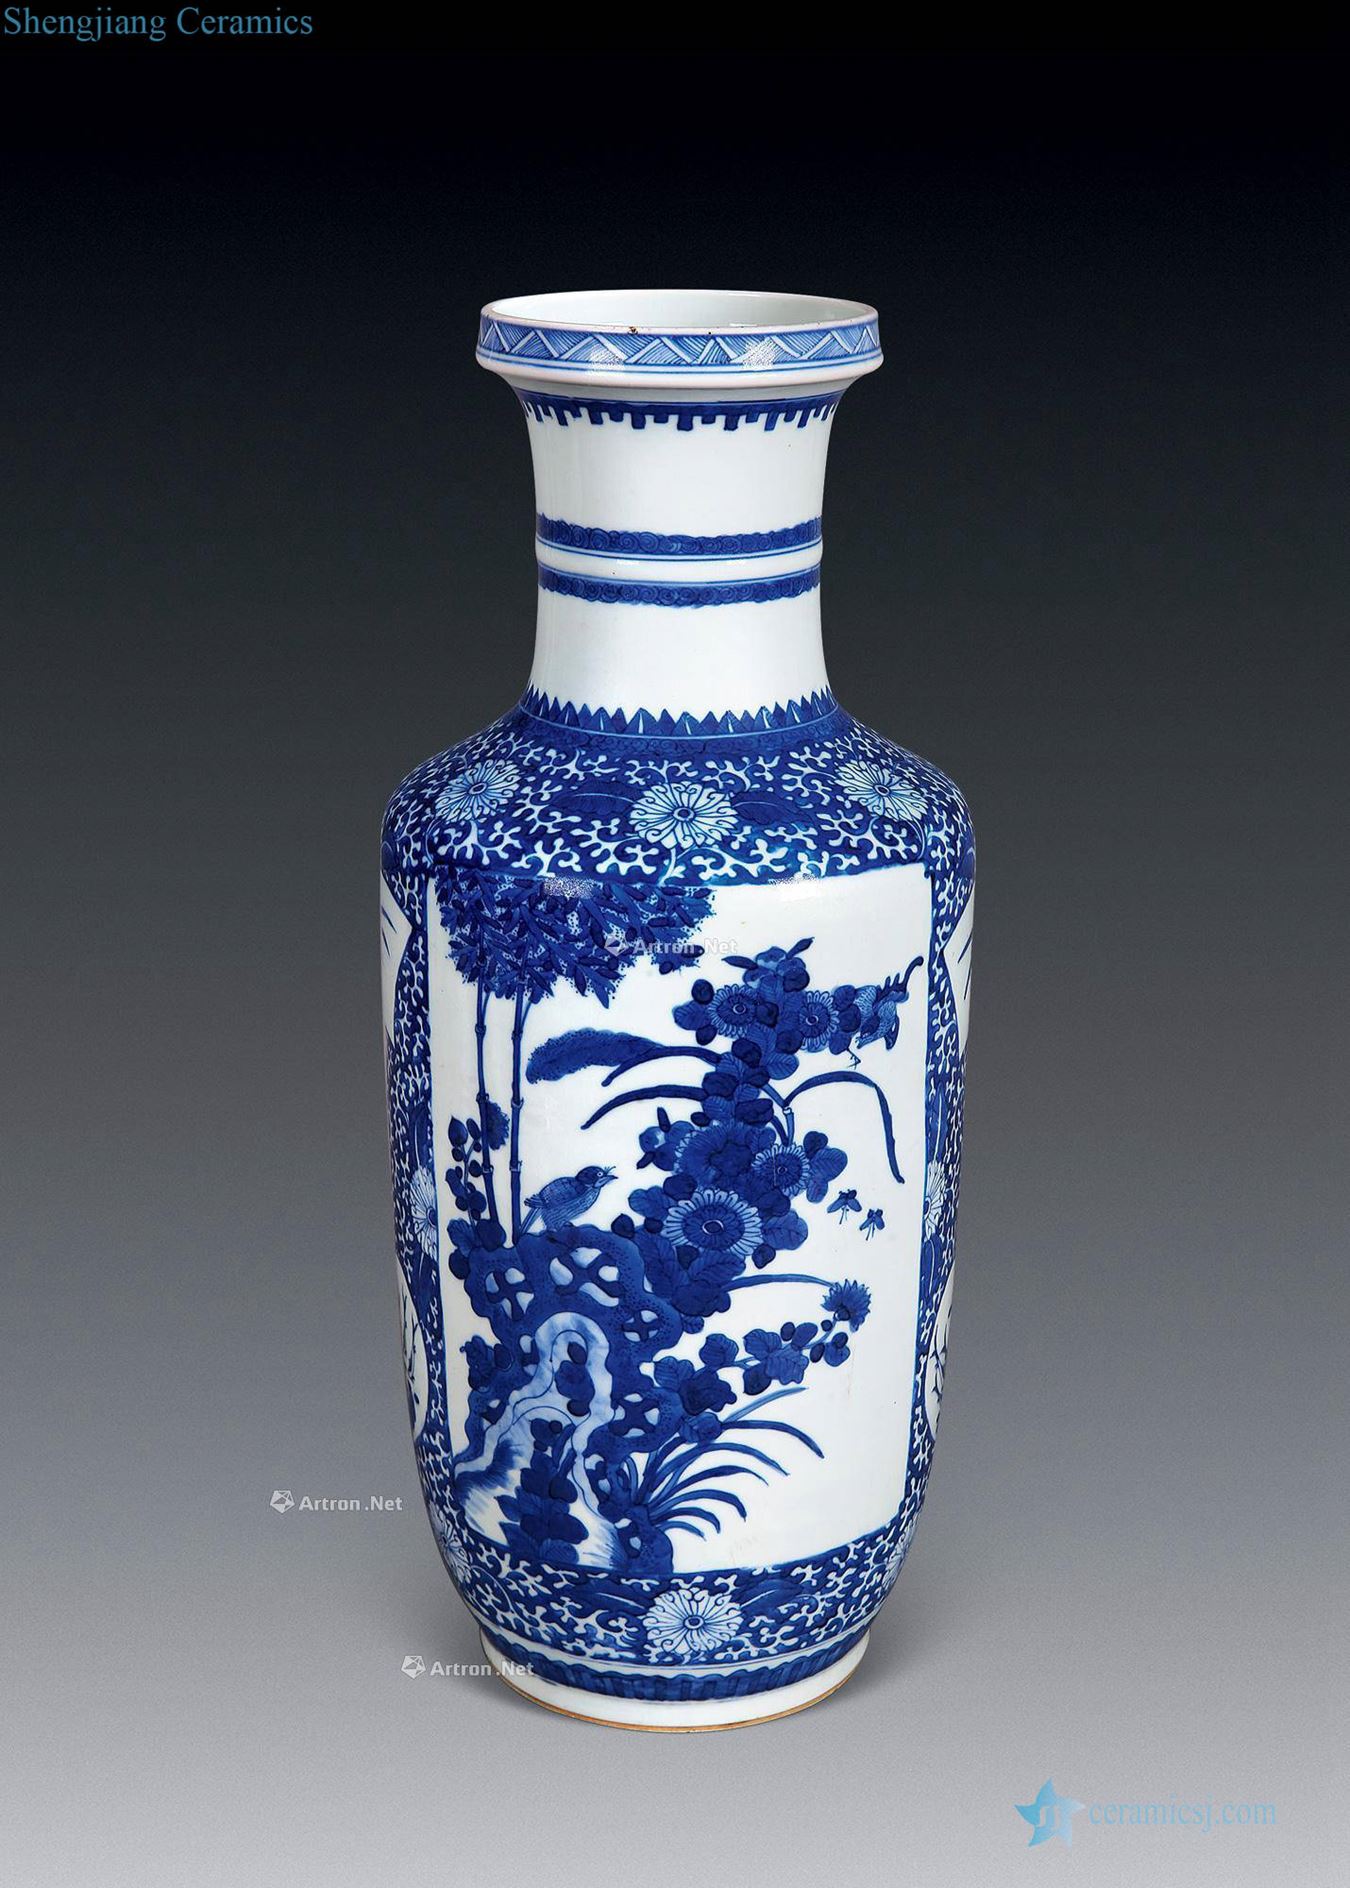 In late qing dynasty Blue and white medallion flower-and-bird lines were bottles